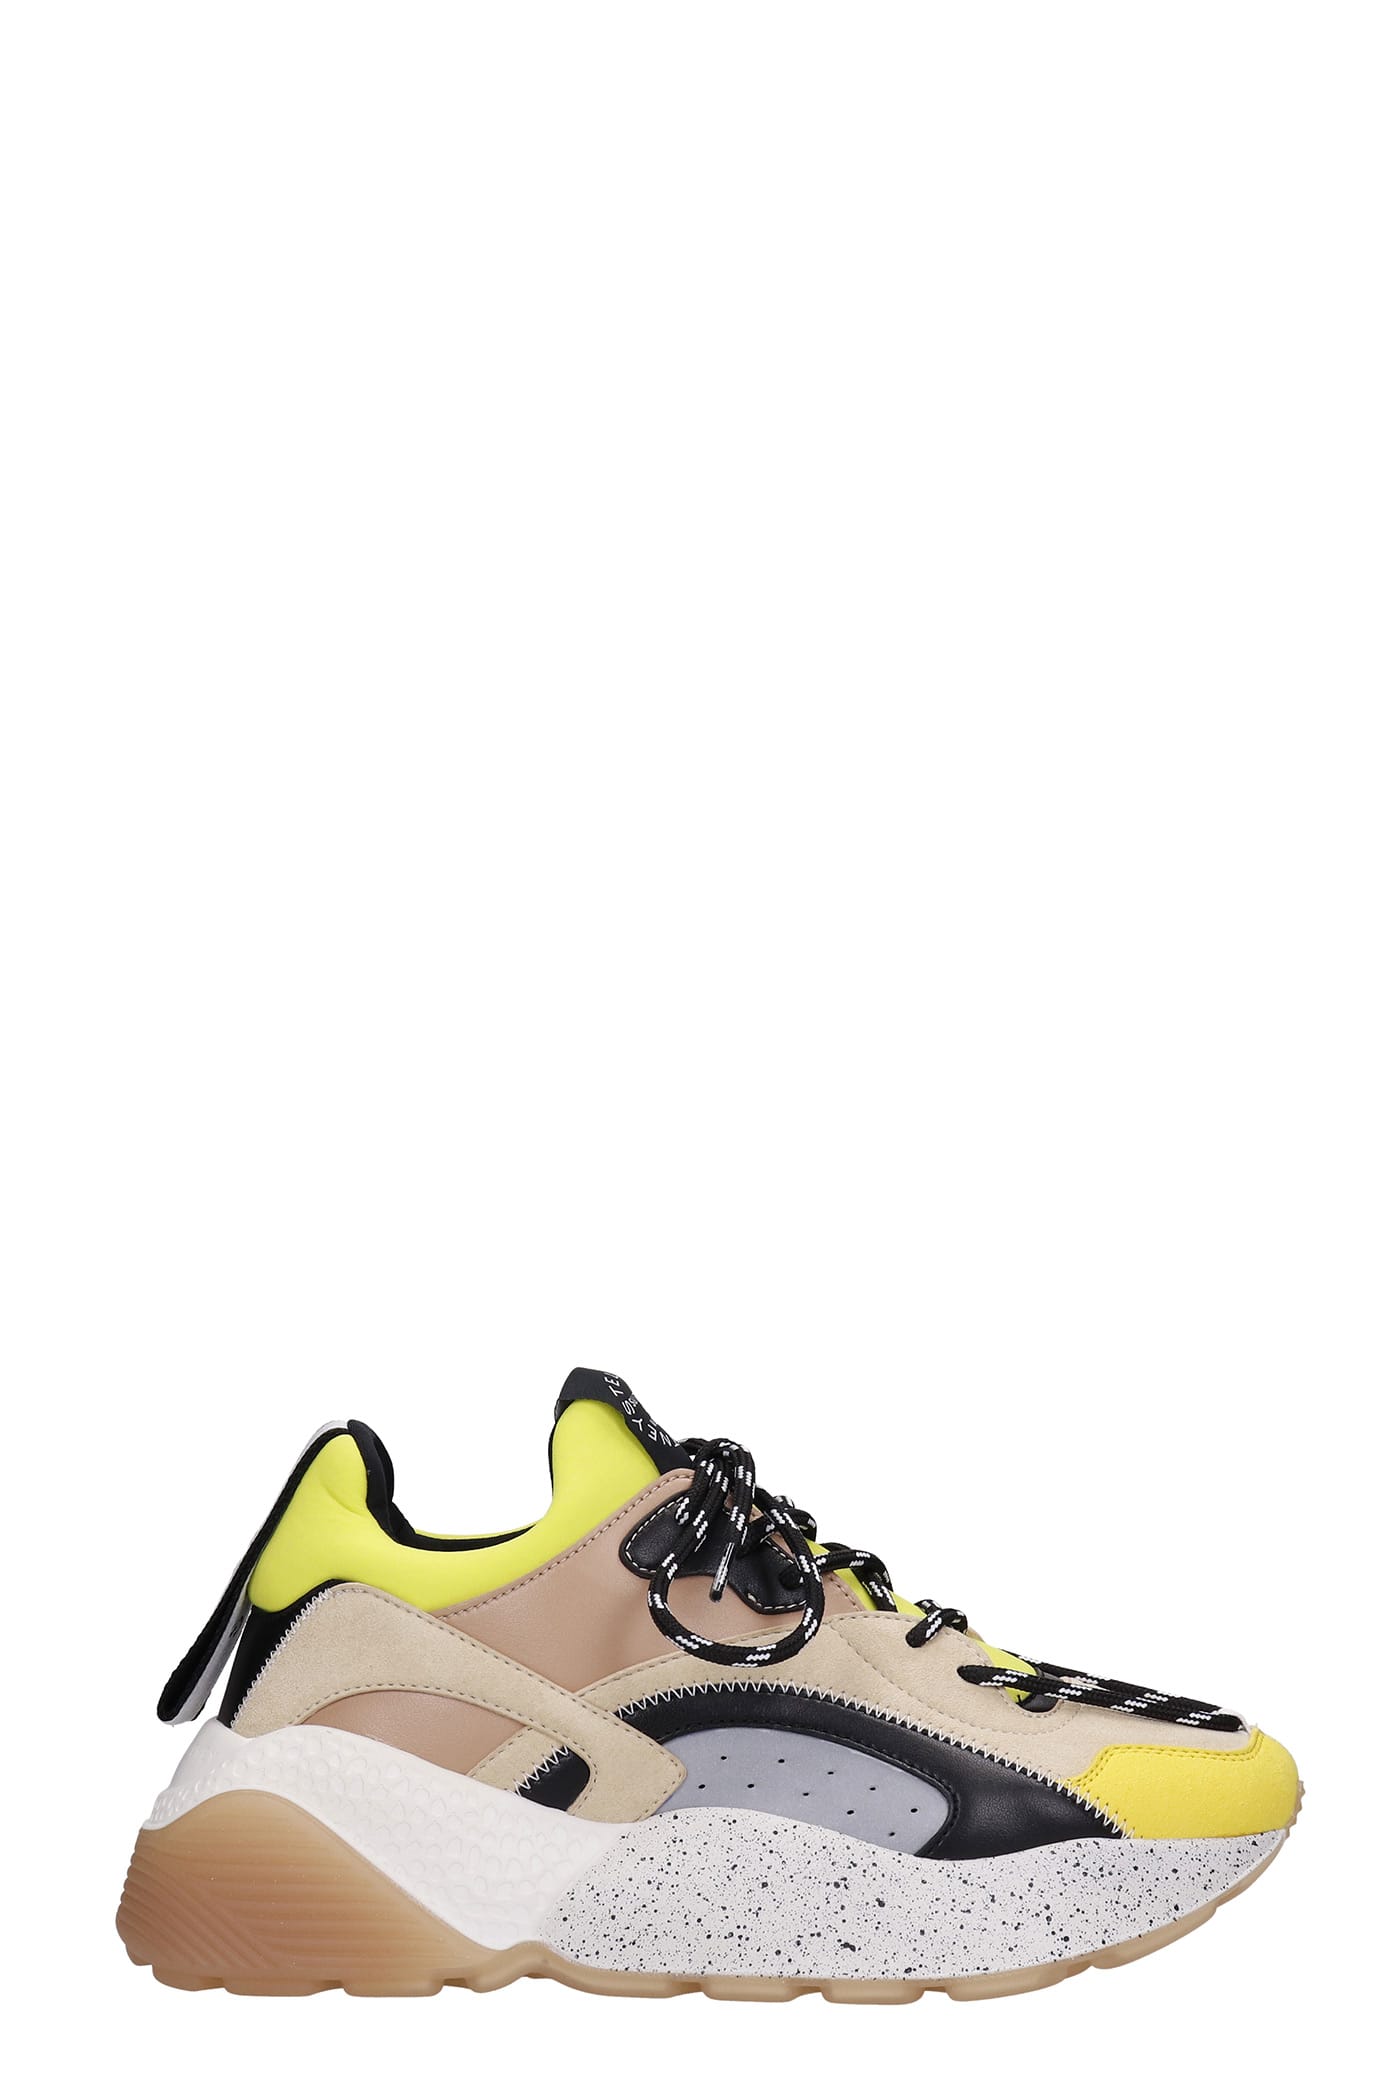 Buy Stella McCartney Eclypse Sneakers In Yellow Synthetic Fibers online, shop Stella McCartney shoes with free shipping